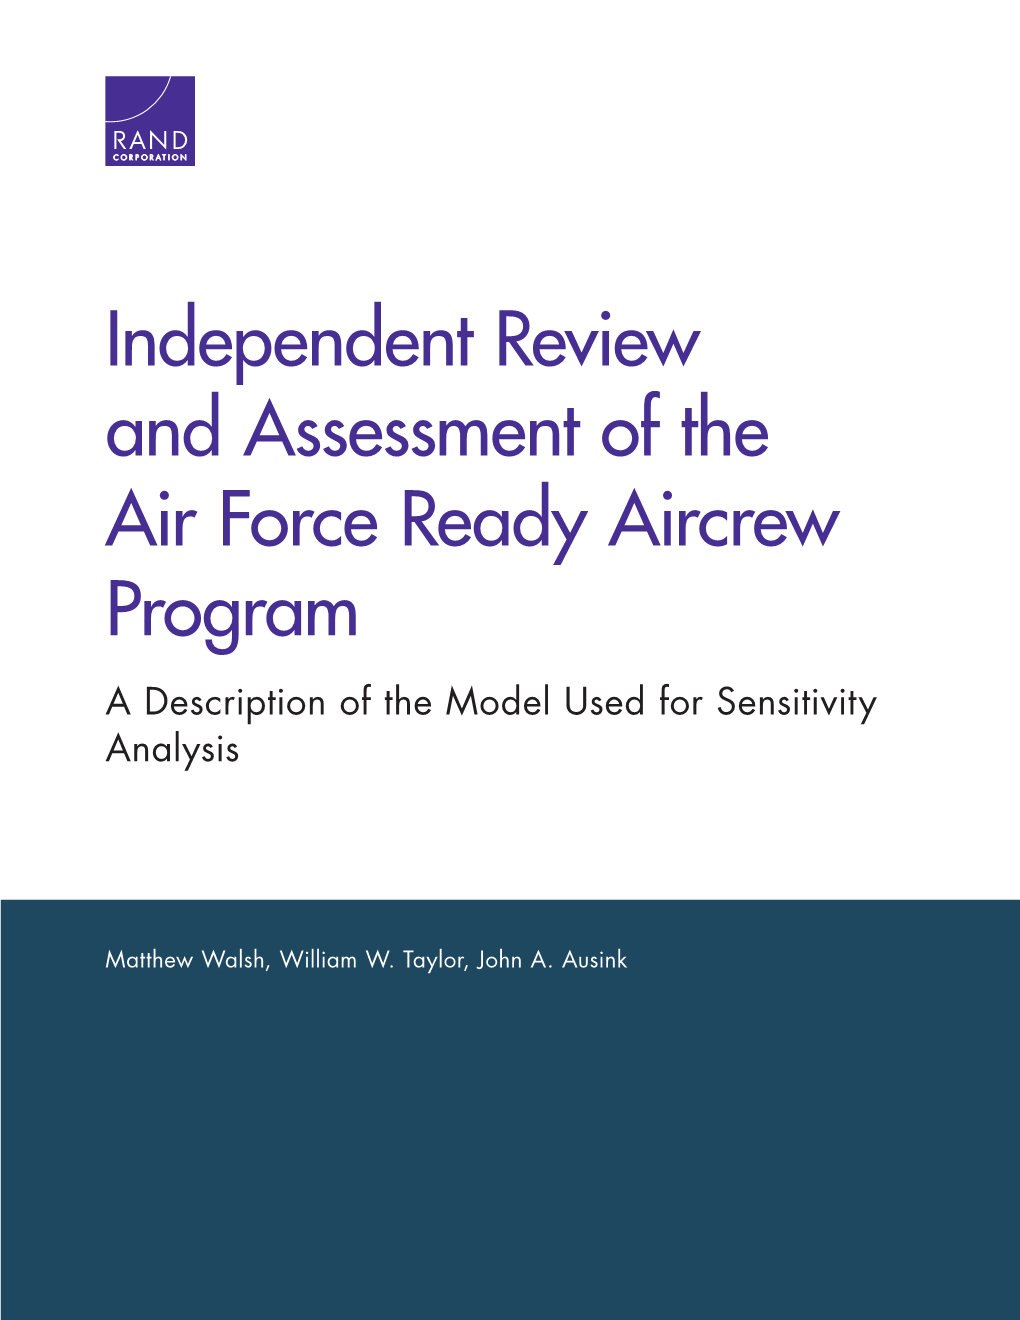 Independent Review and Assessment of the Air Force Ready Aircrew Program a Description of the Model Used for Sensitivity Analysis